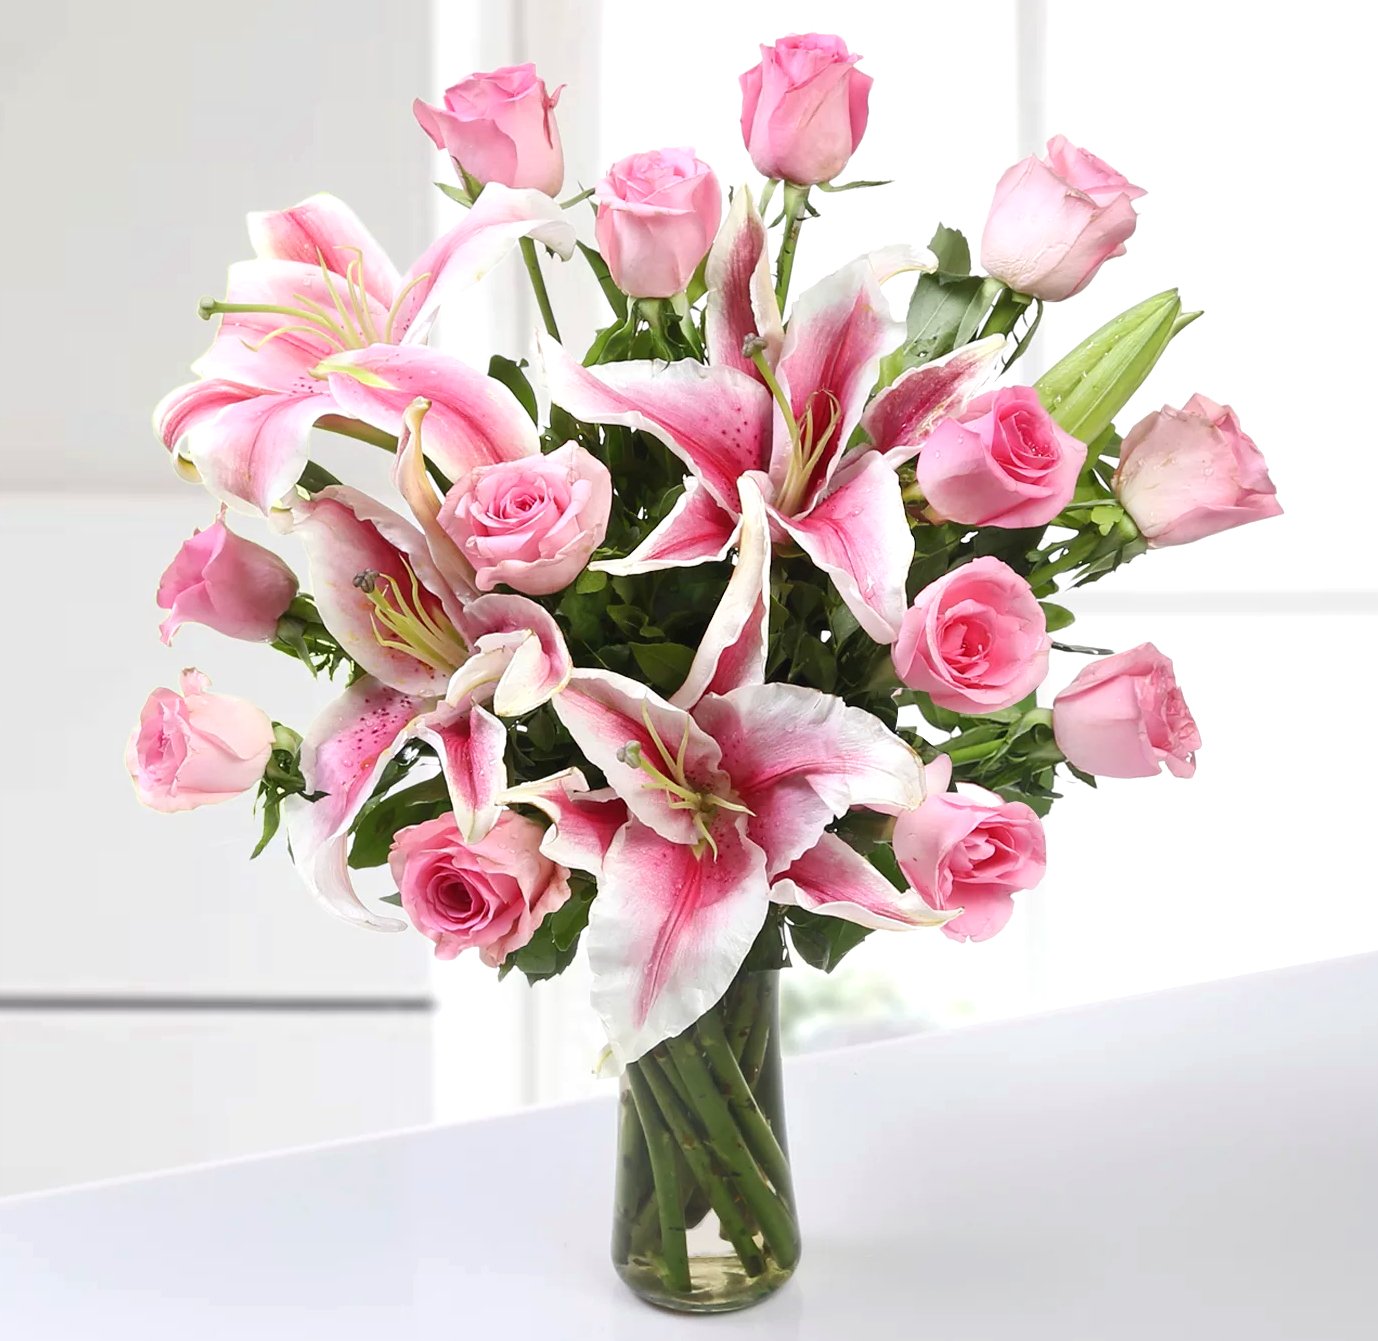 Lilies and Pink Roses in Vase - Fruit n Floral